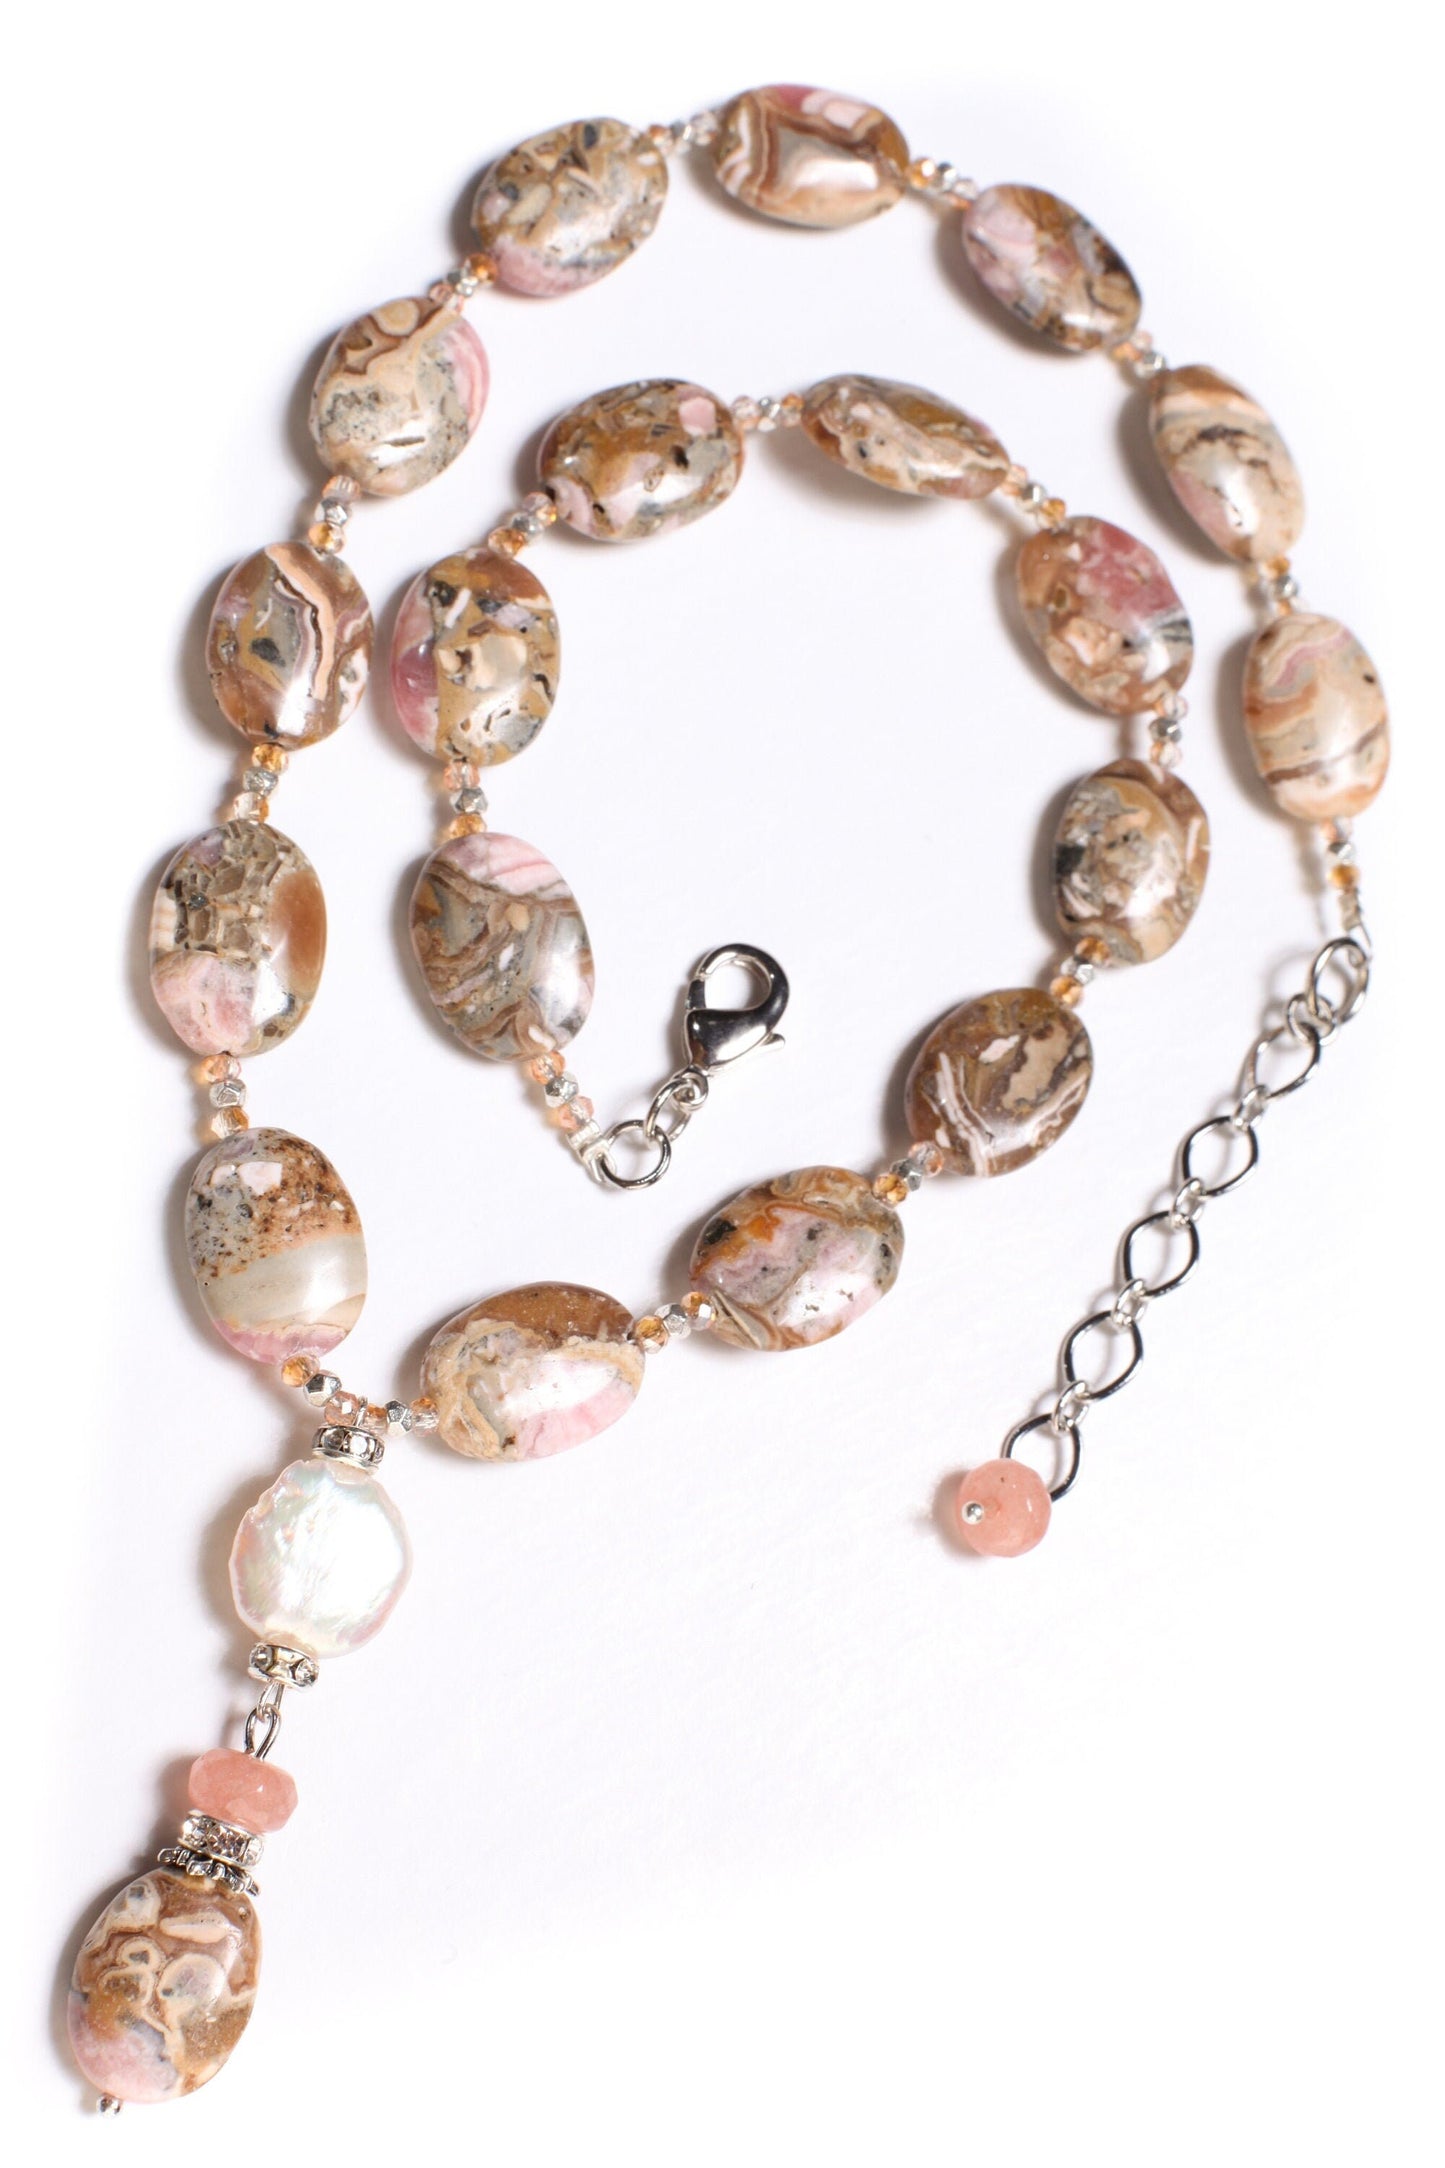 Natural Argentina Rhodochrosite Rare Gemstone 10x14mm Oval Necklace with Extended Chain Freshwater Coin Pearl accents pendant.18.5&quot; plus 2&quot;